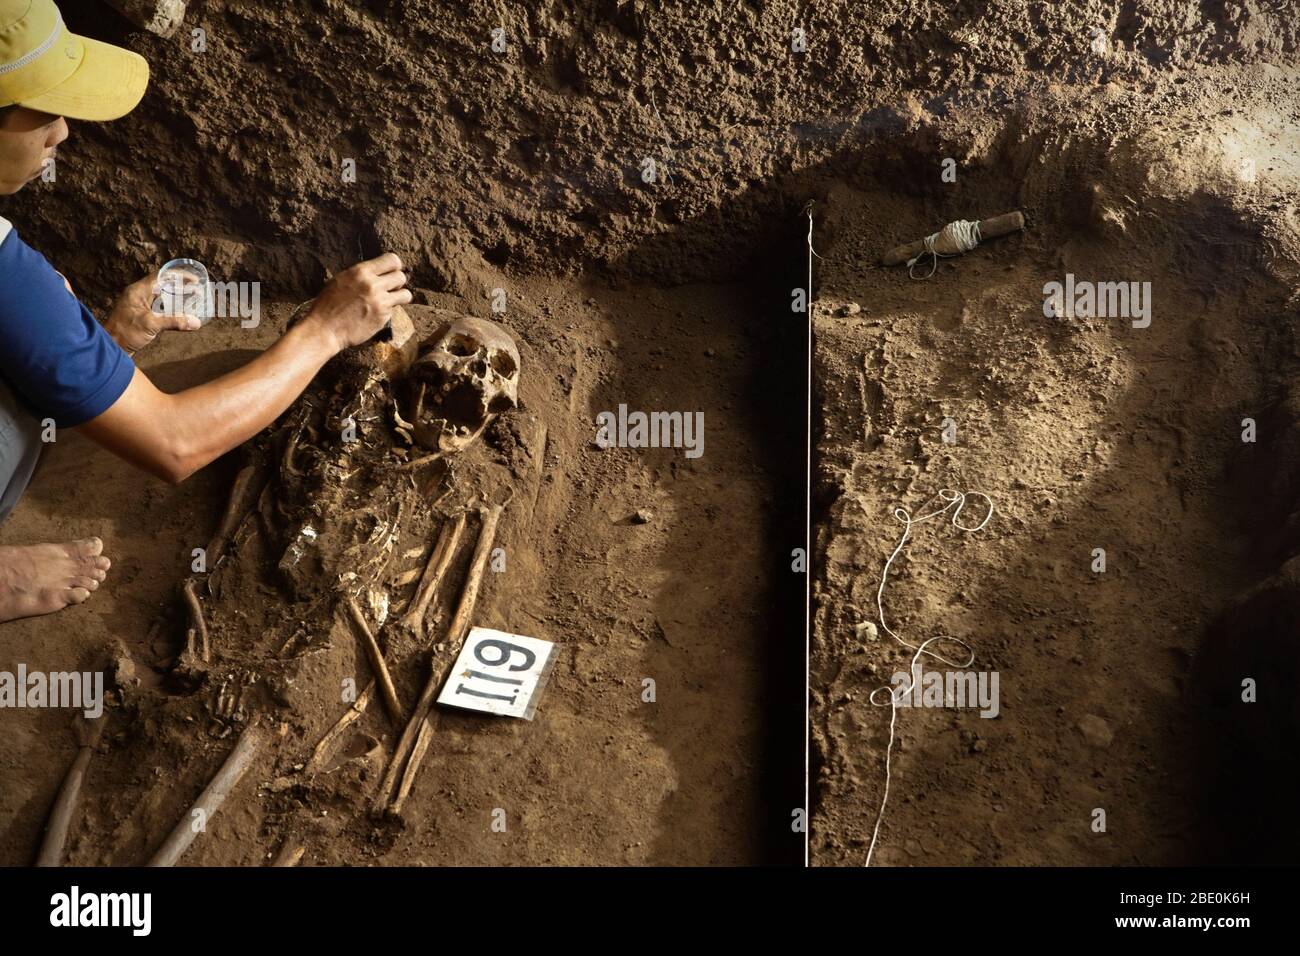 Member of Indonesian archaeology team cleaning up prehistoric Mongoloid skeletons at the Gua Harimau excavation site in Sumatra, Indonesia. Stock Photo